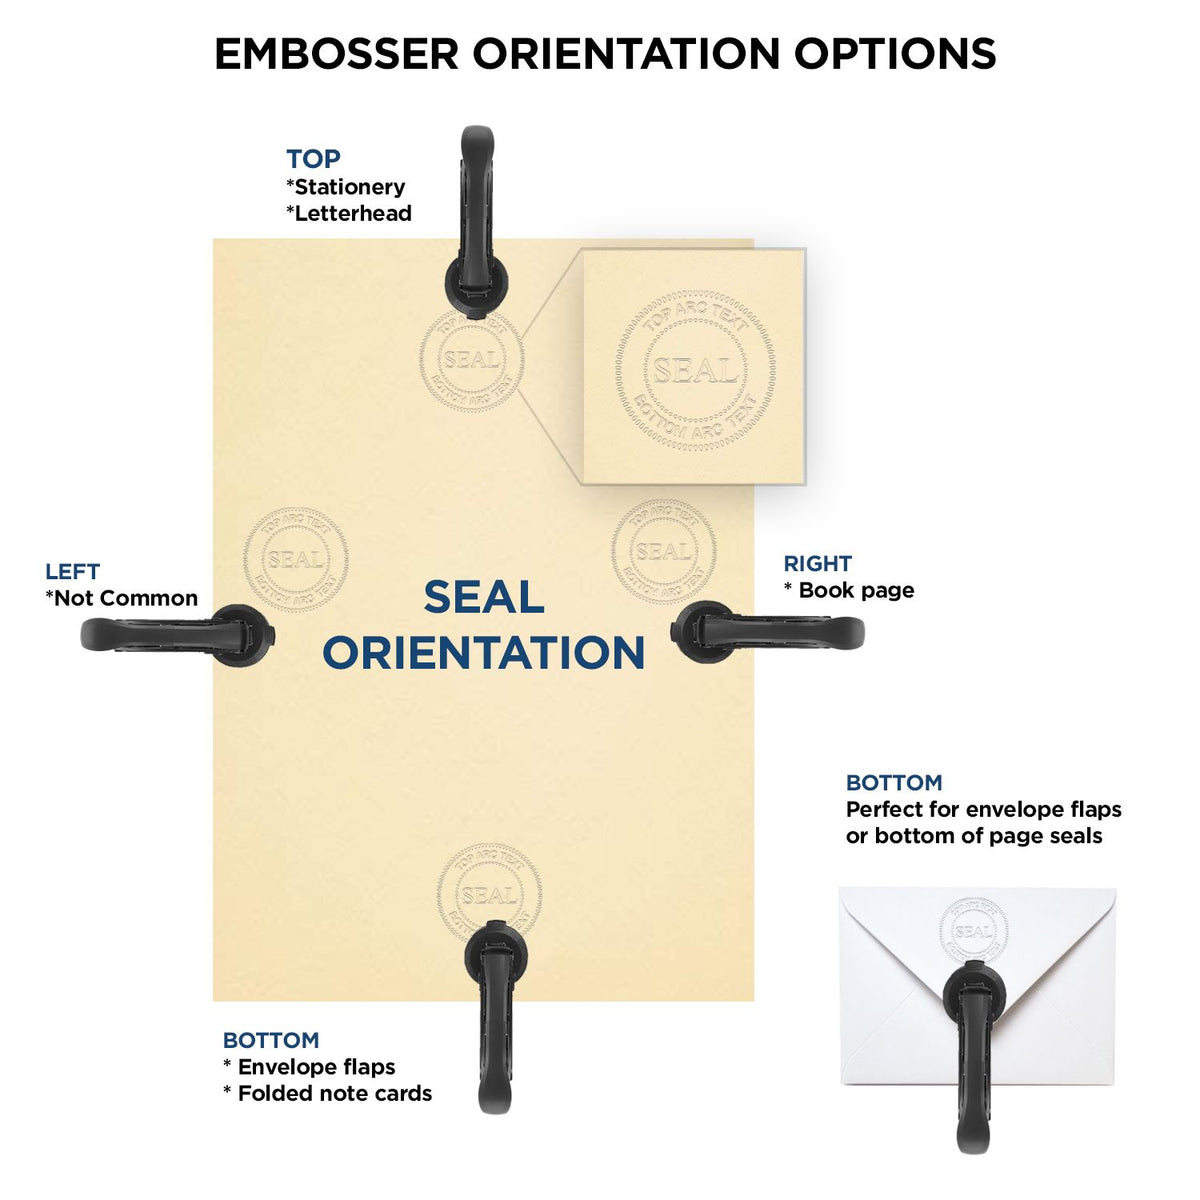 An infographic for the Heavy Duty Cast Iron Maine Land Surveyor Seal Embosser showing embosser orientation, this is showing examples of a top, bottom, right and left insert.